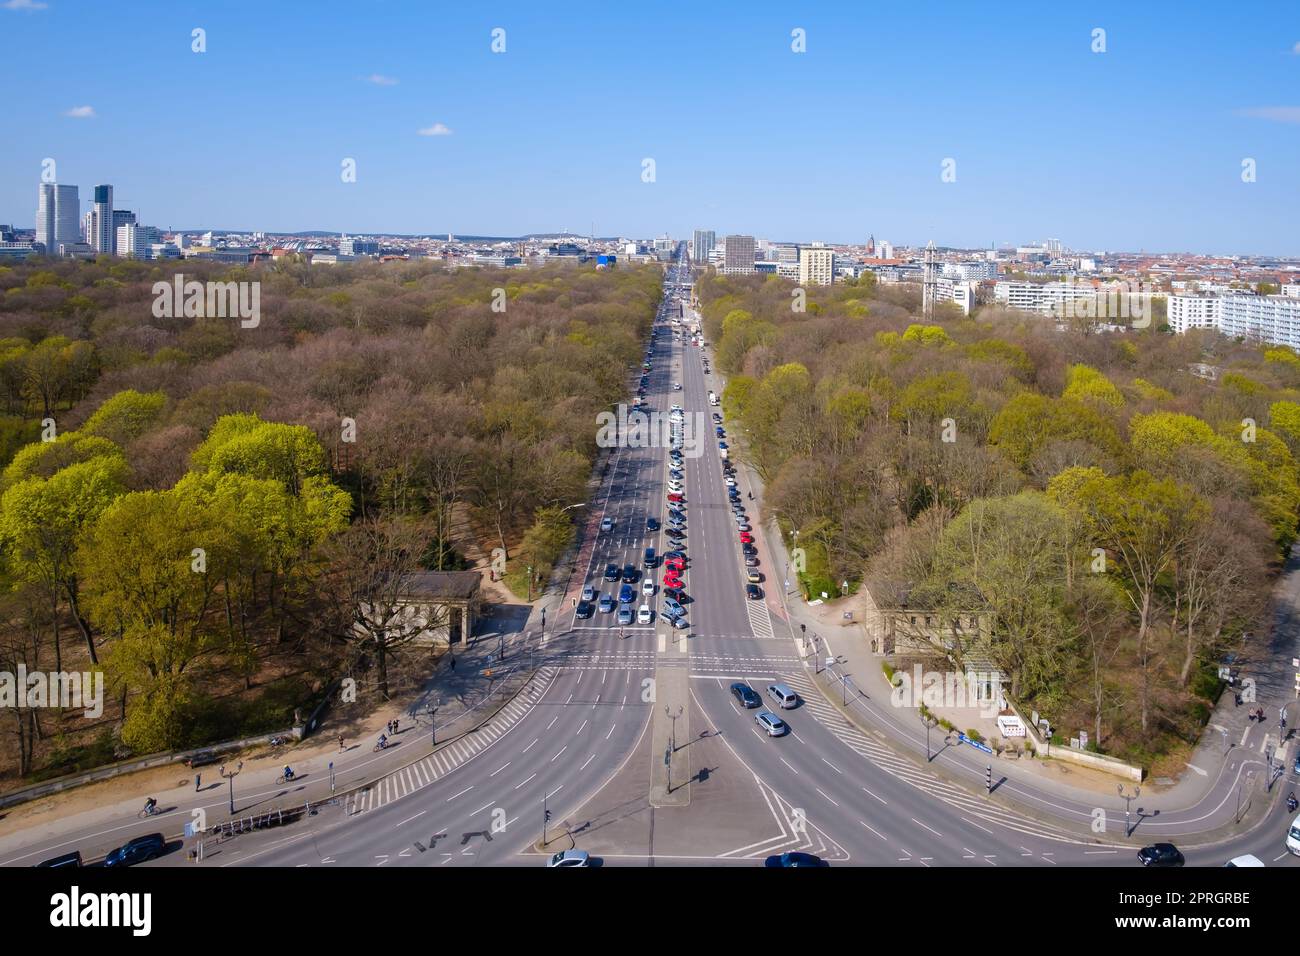 Panoramic view of the Bundesstraße, the federal highway leading to the Brandenburg Gate in Berlin Germany Stock Photo